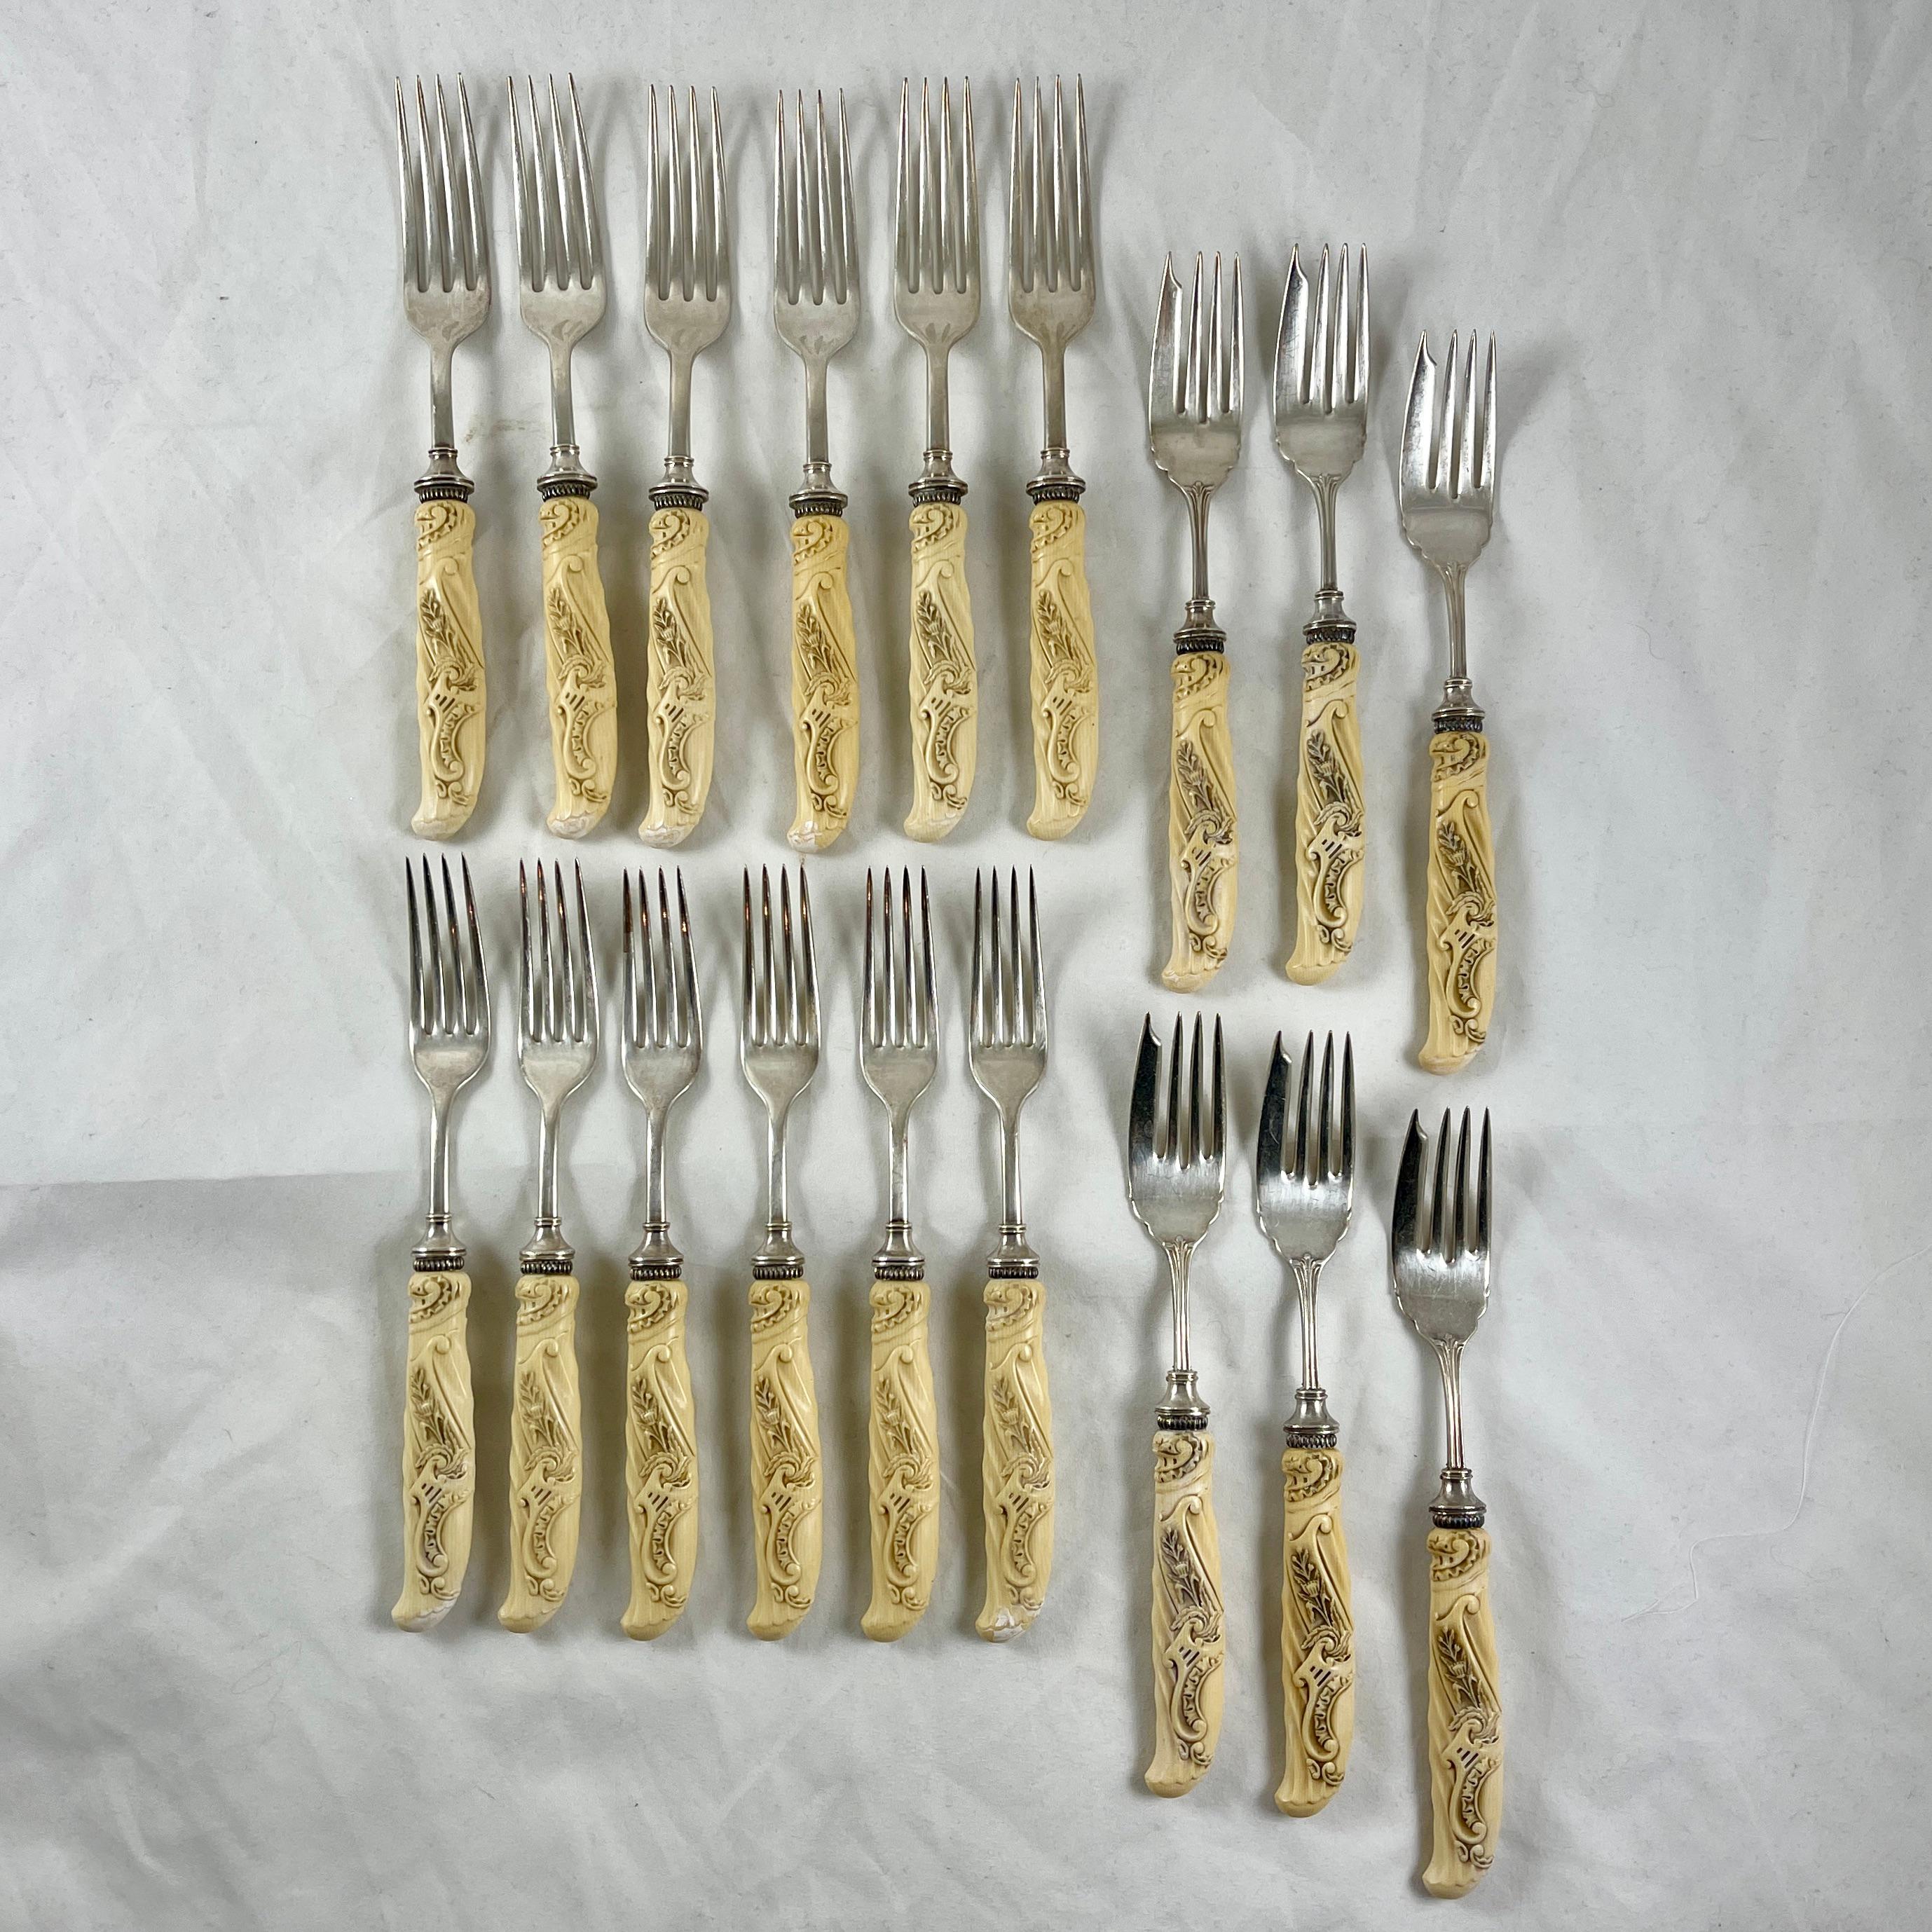 Landers, Frary & Clark Celluloid Ivory Handled Tableware Cutlery – 30 piece Set In Good Condition For Sale In Philadelphia, PA